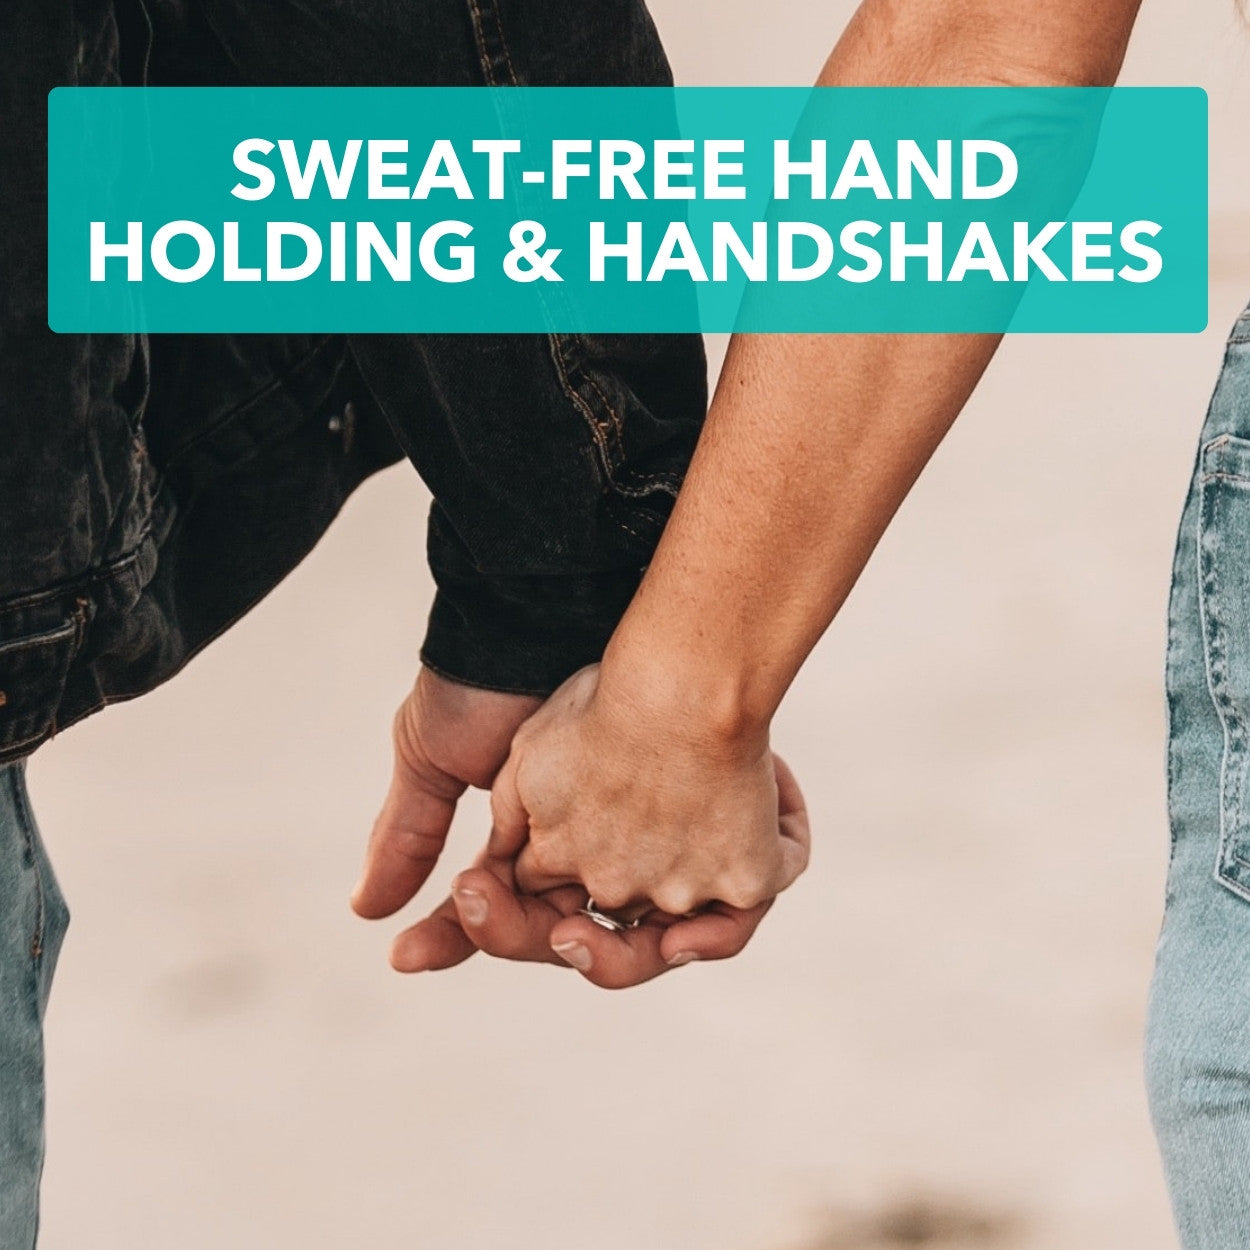 hold hands without worry of sweaty palms